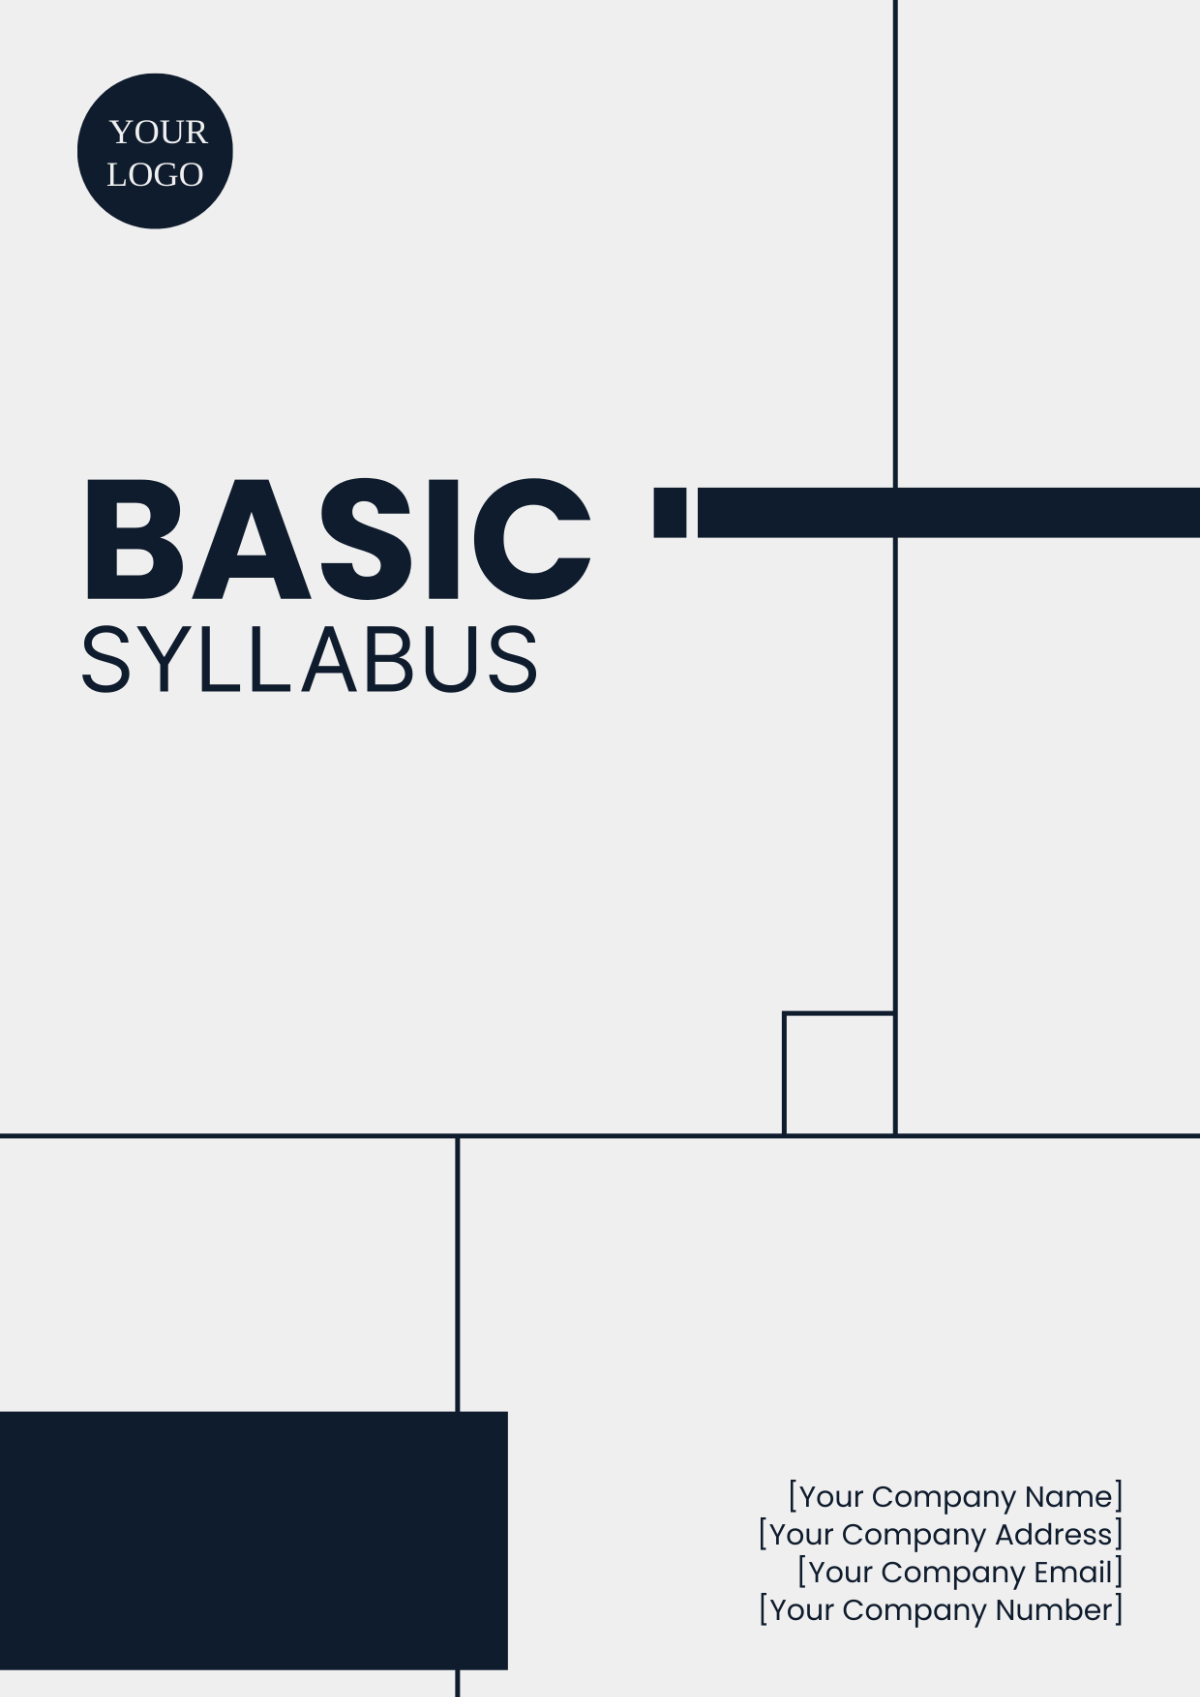 Basic Syllabus Cover Page